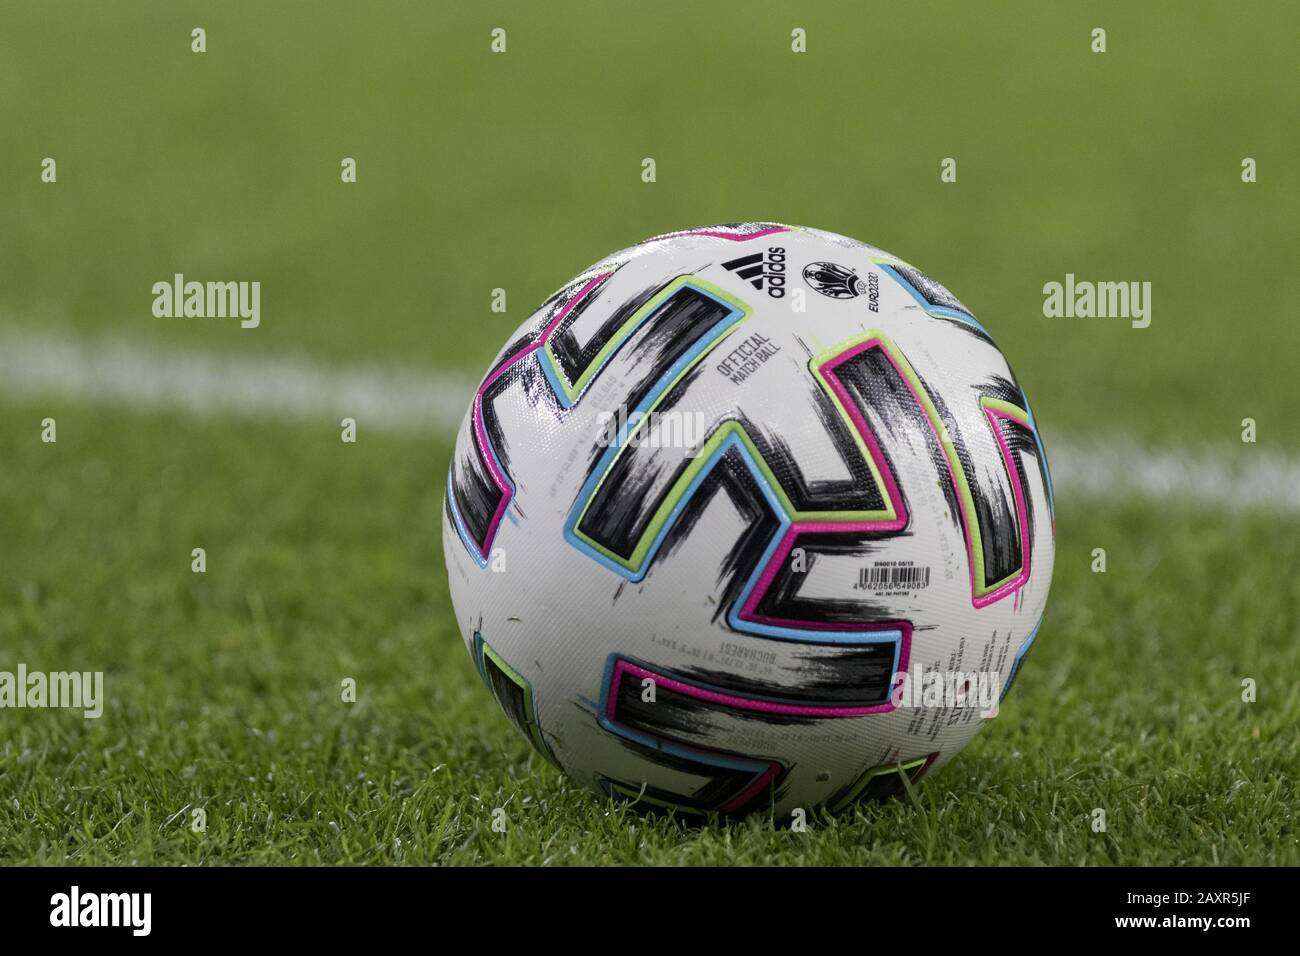 Bilbao, Bizkaia, SPAIN. 12th Feb, 2020. Adidas official Copa del Rey ball  during the game between Athletic Club and Granada. Athletic Club de Bilbao  hosted Granada CF in the going match of